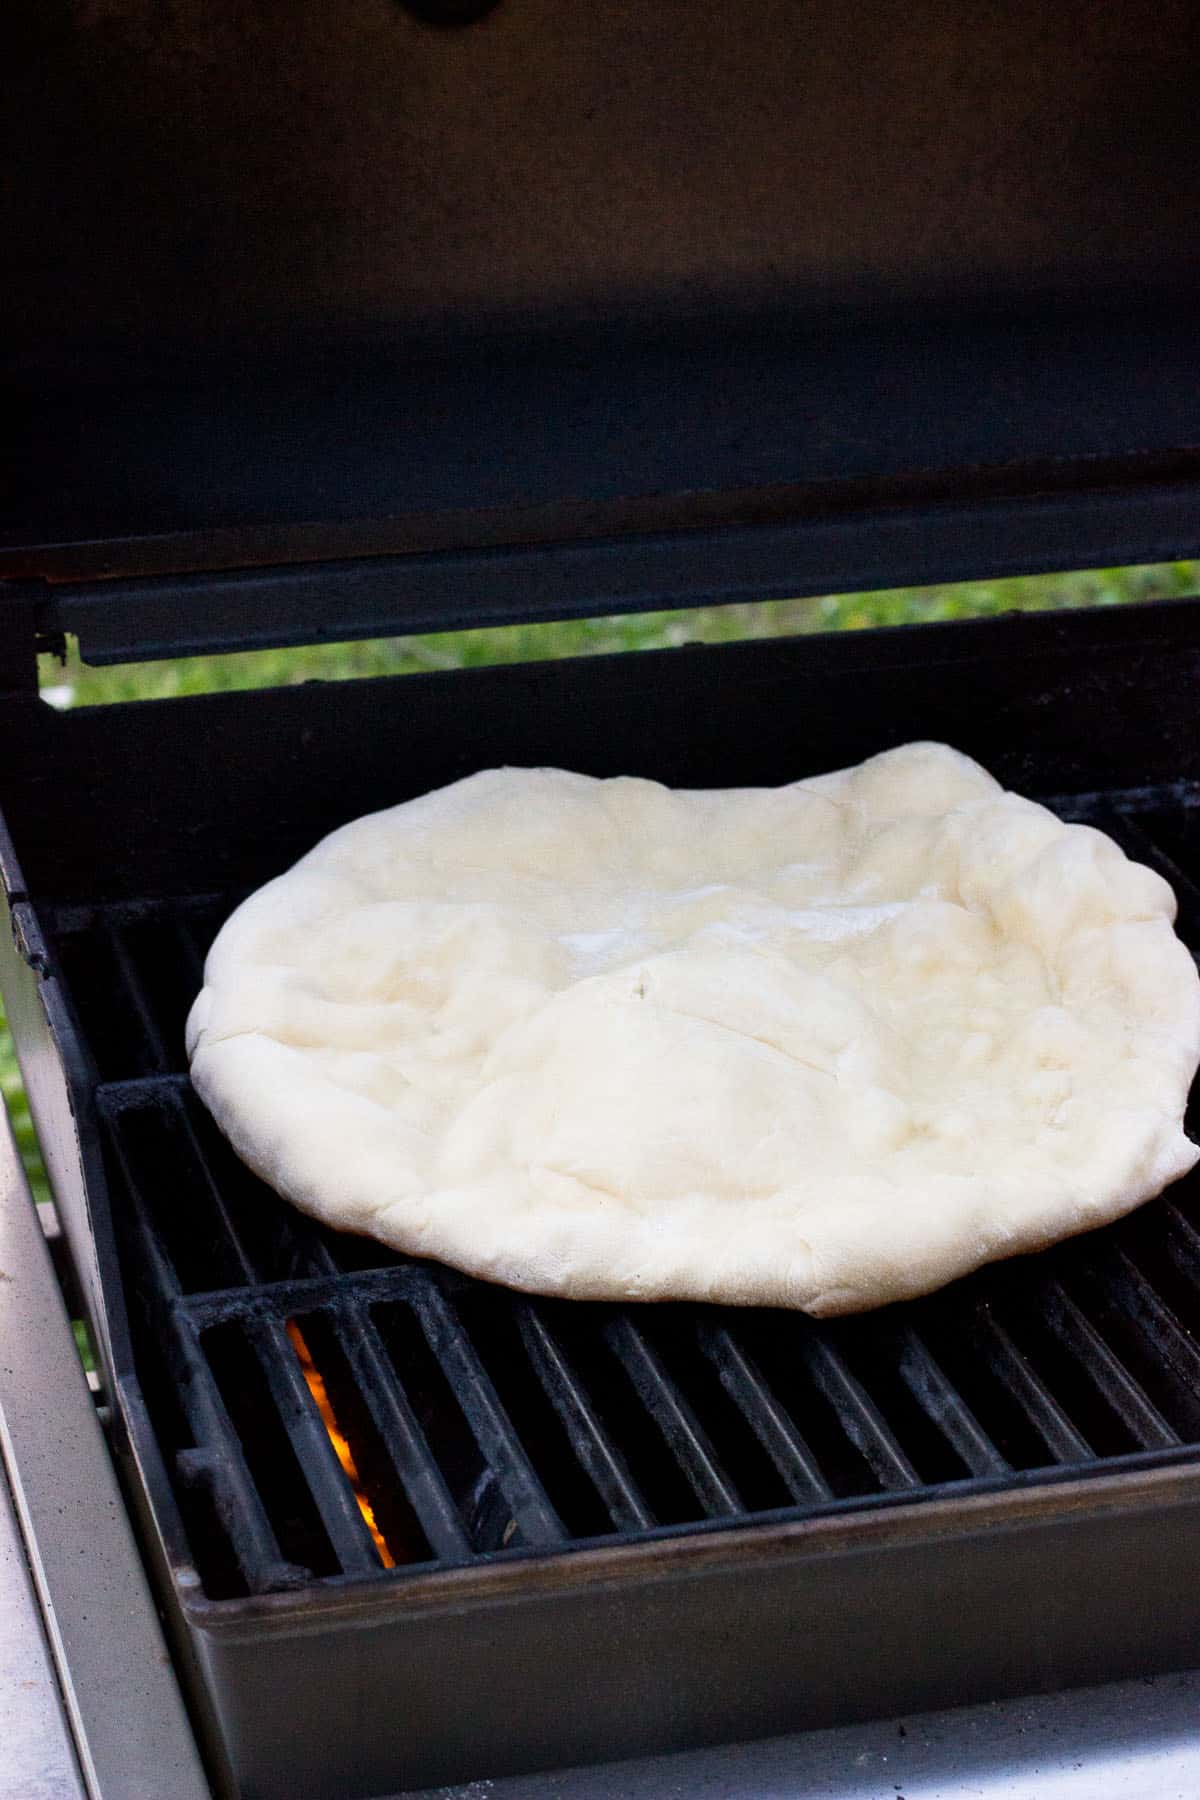 Puffed up pizza dough cooking on a grill.